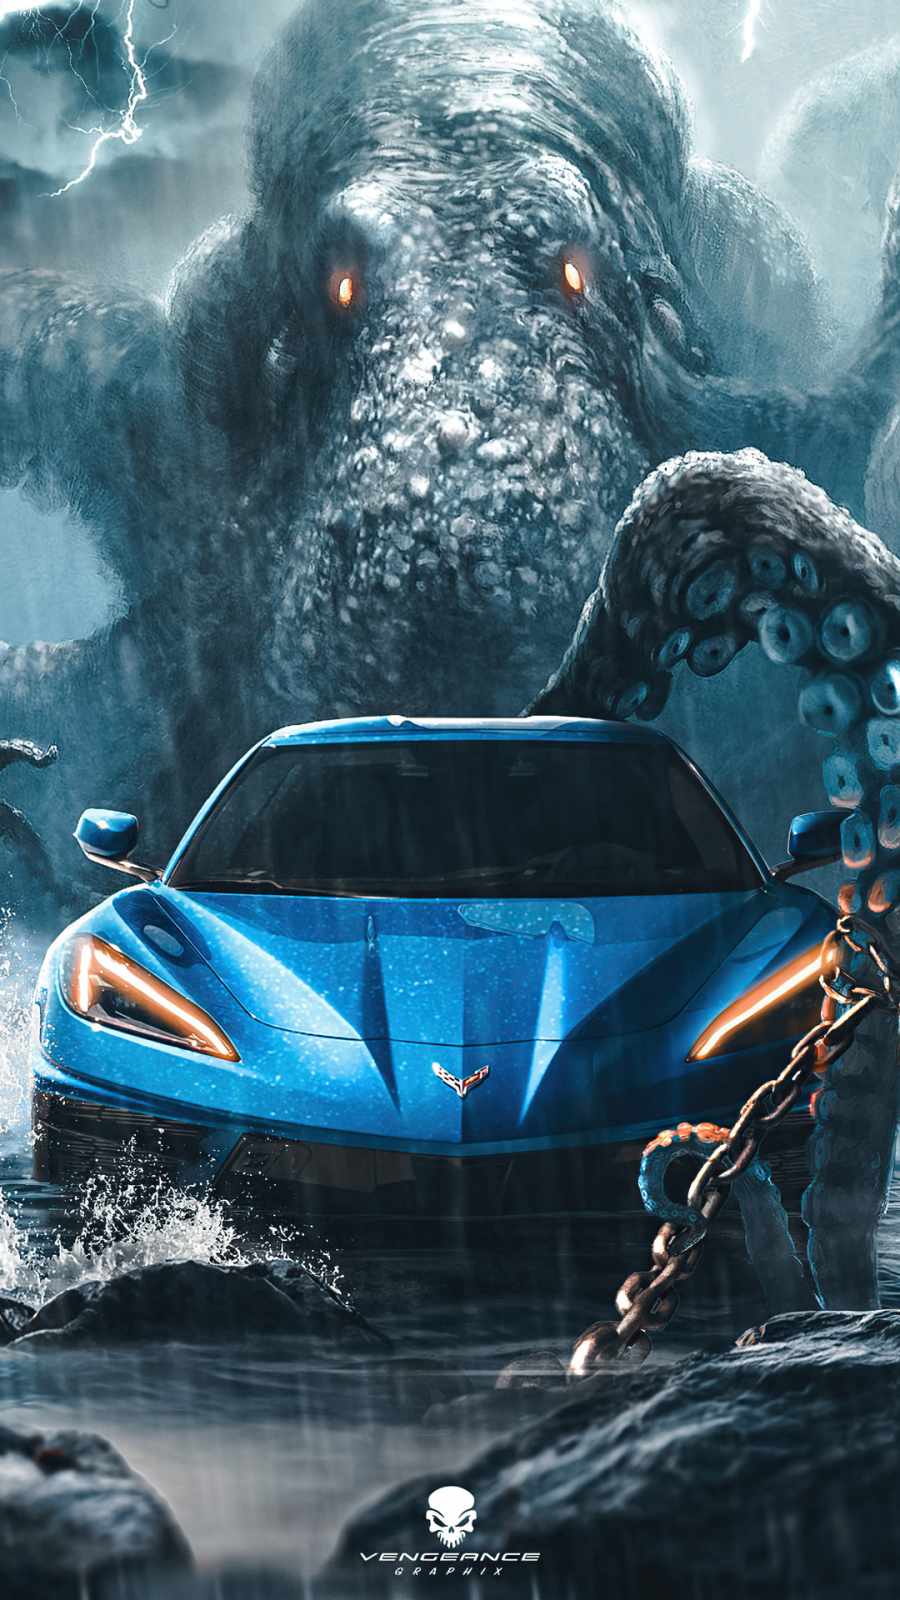 Chevy Iphone Wallpapers